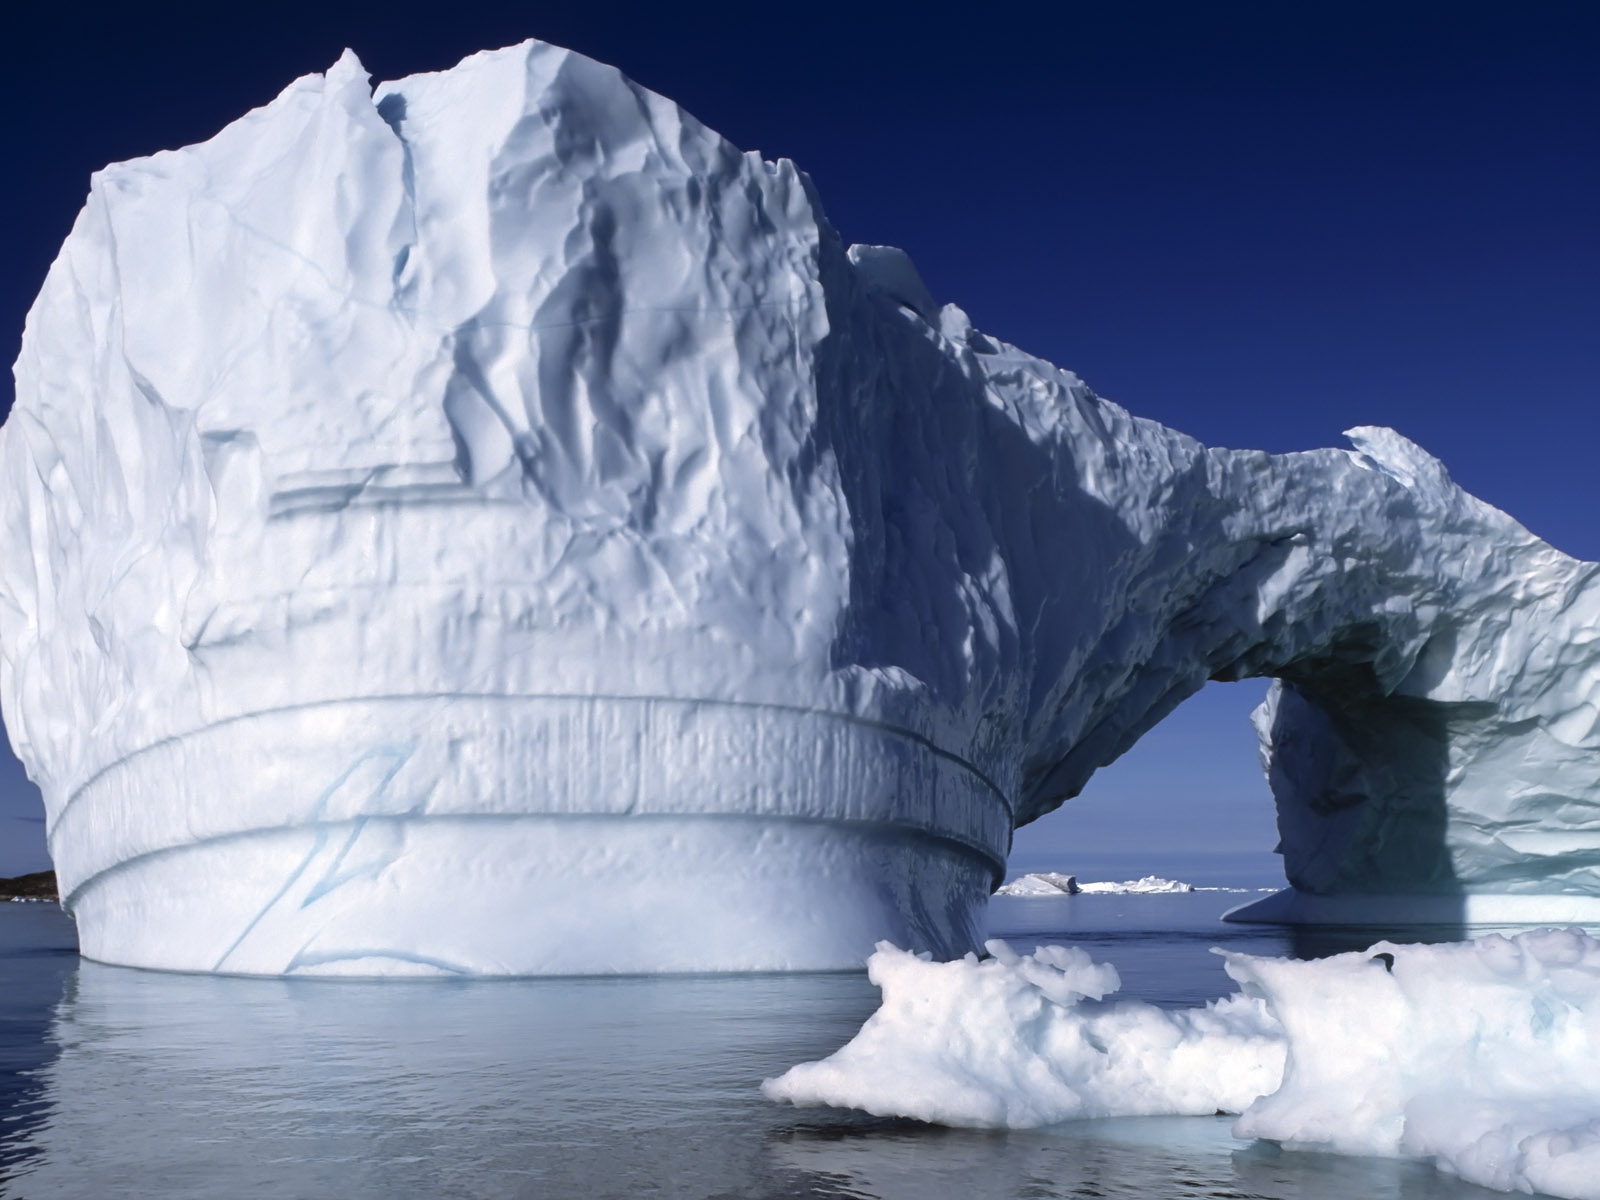 Download full size Icebergs wallpaper / Nature / 1600x1200